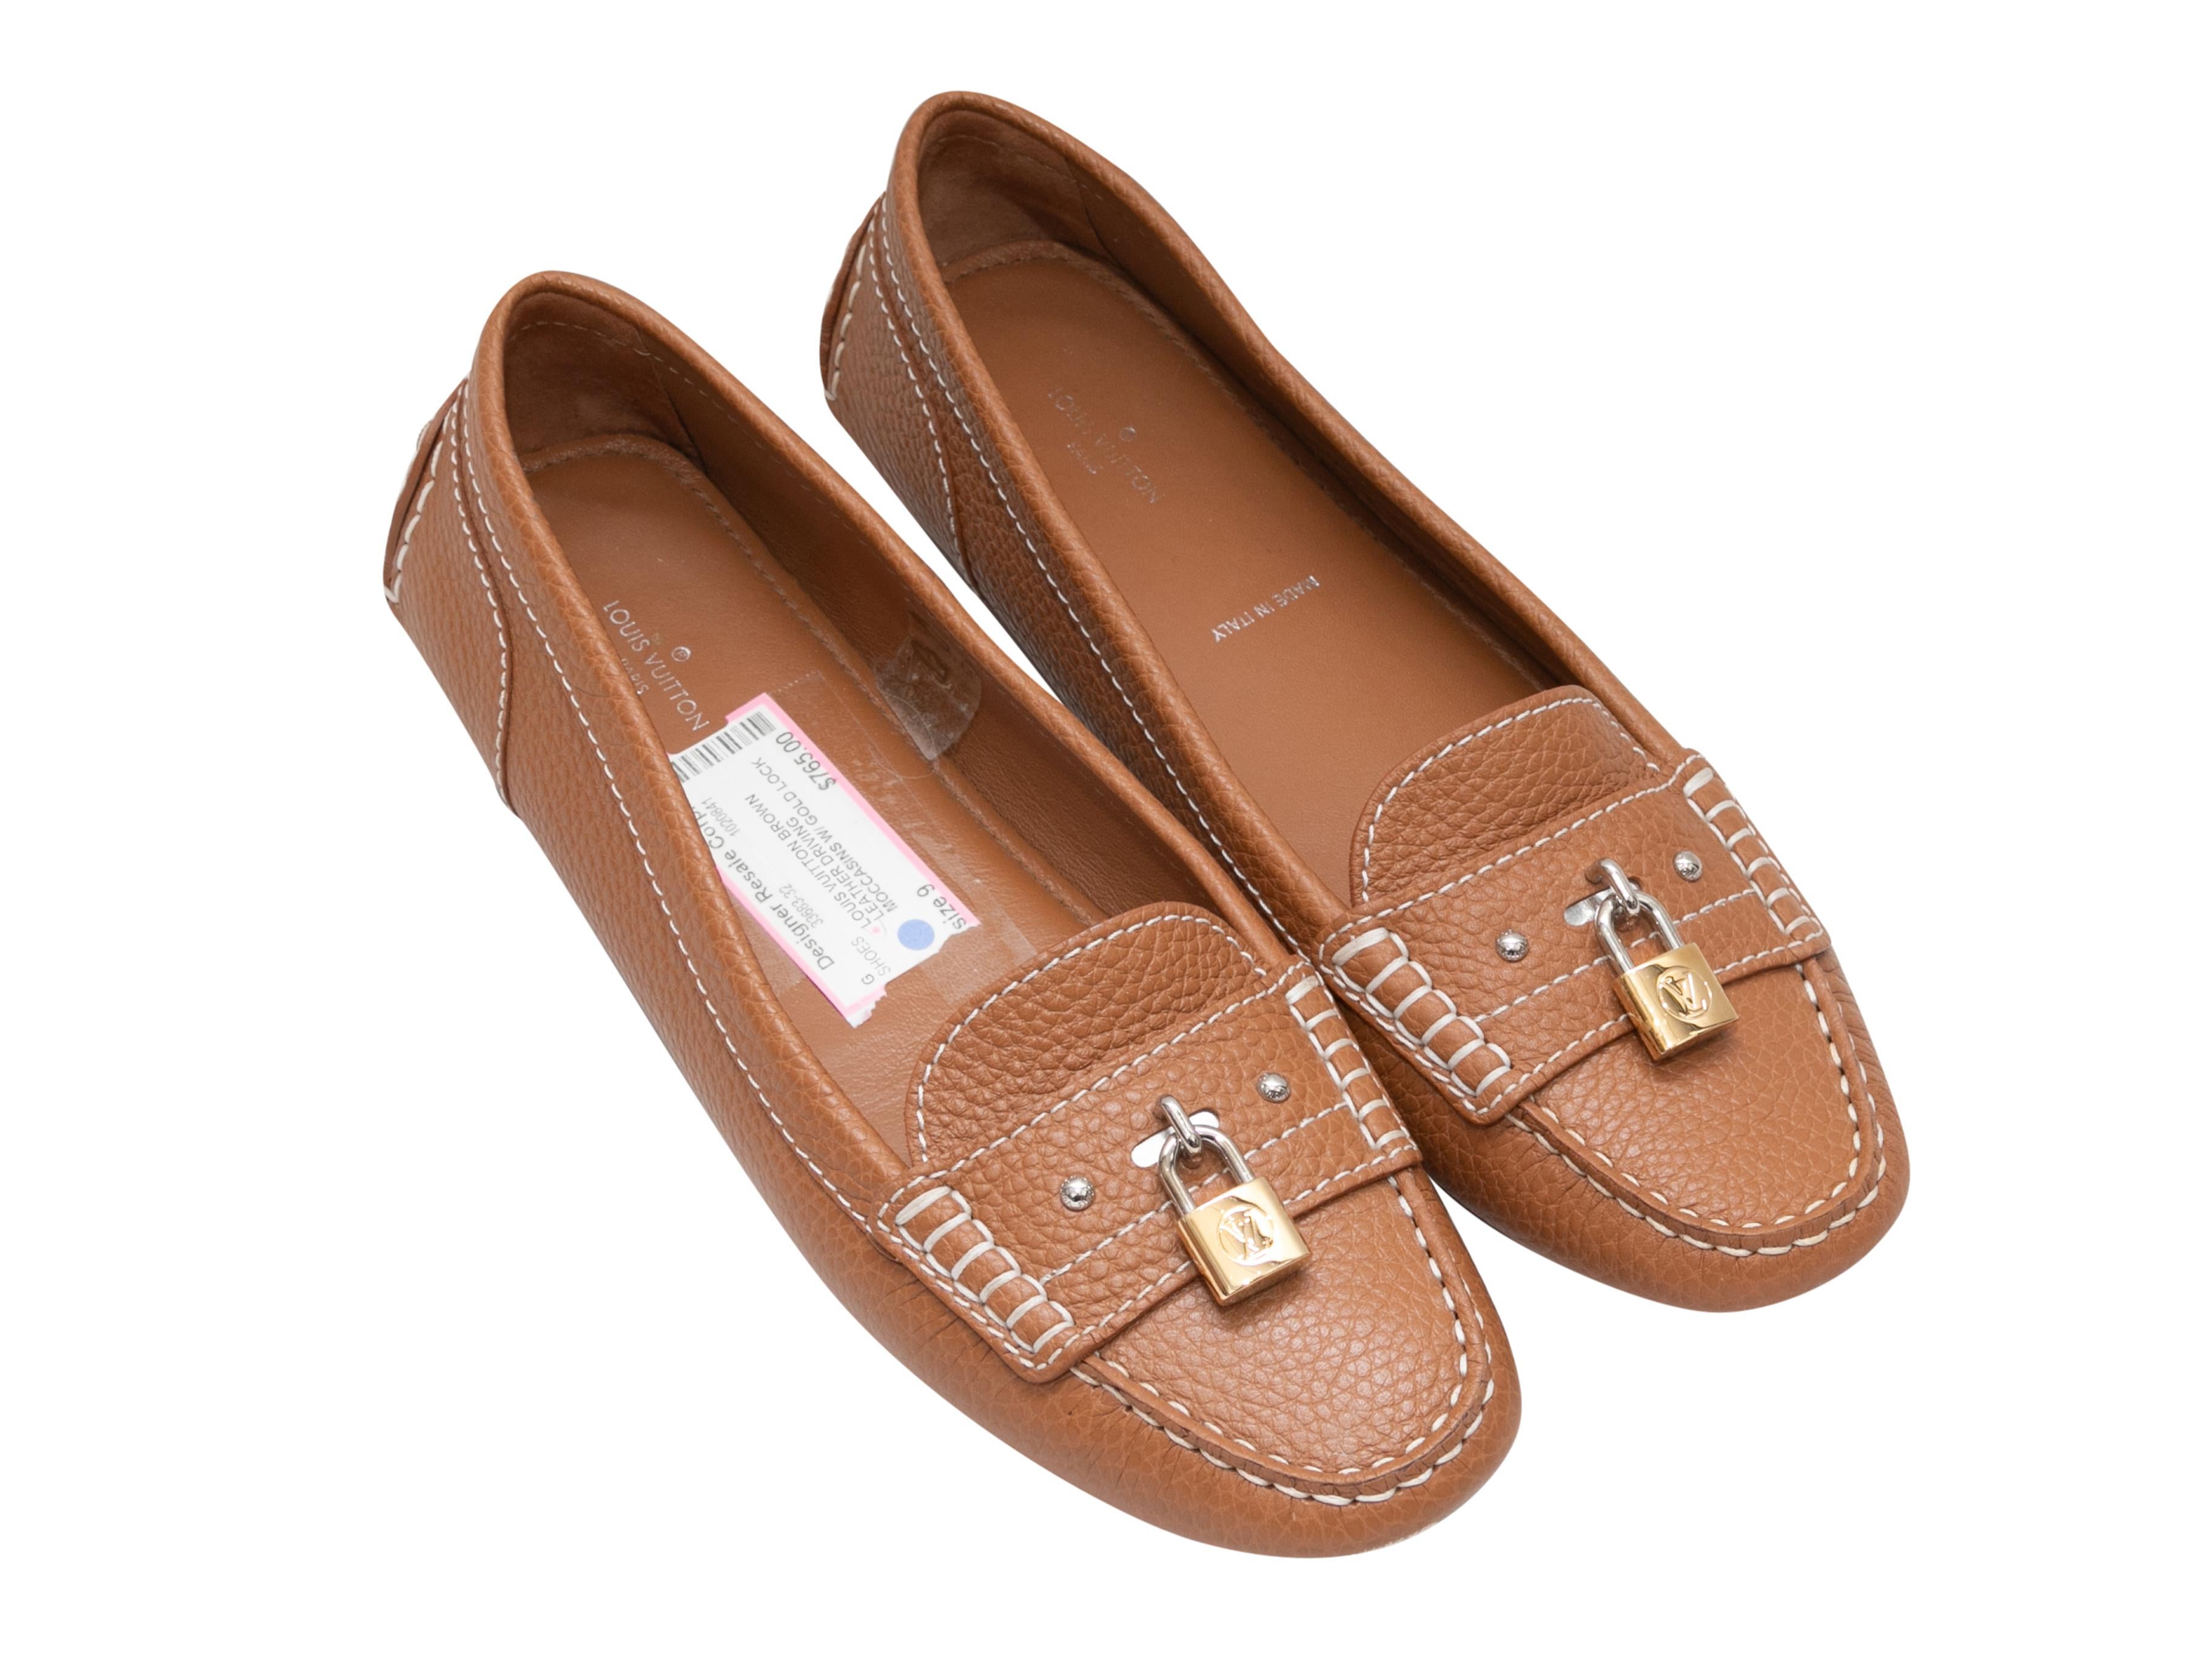 Tan leather Lock-It driving loafers by Louis Vuitton. Gold-tone hardware. Contrast stitching throughout. Rubber bumpers at counters and at soles. 

Designer Size: 39
US Recommended Size: 9 